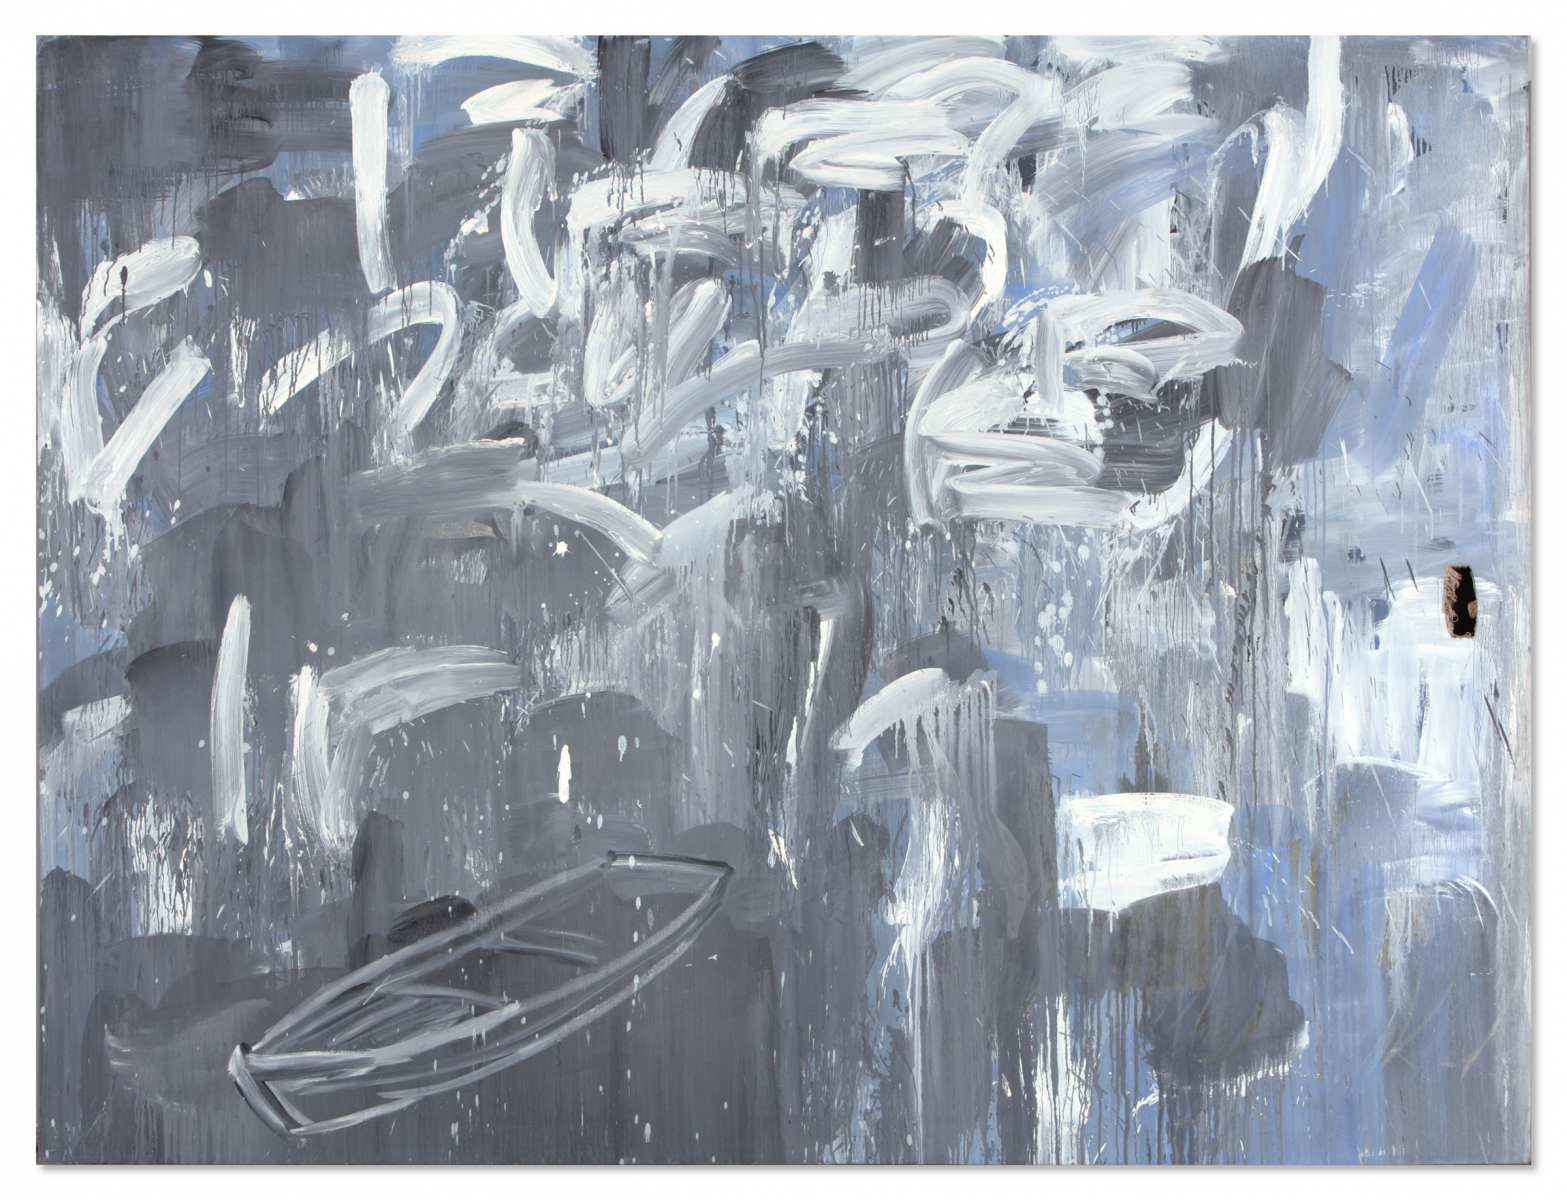 Untitled-94127, 1994, Oil on Canvas, 194x259cm